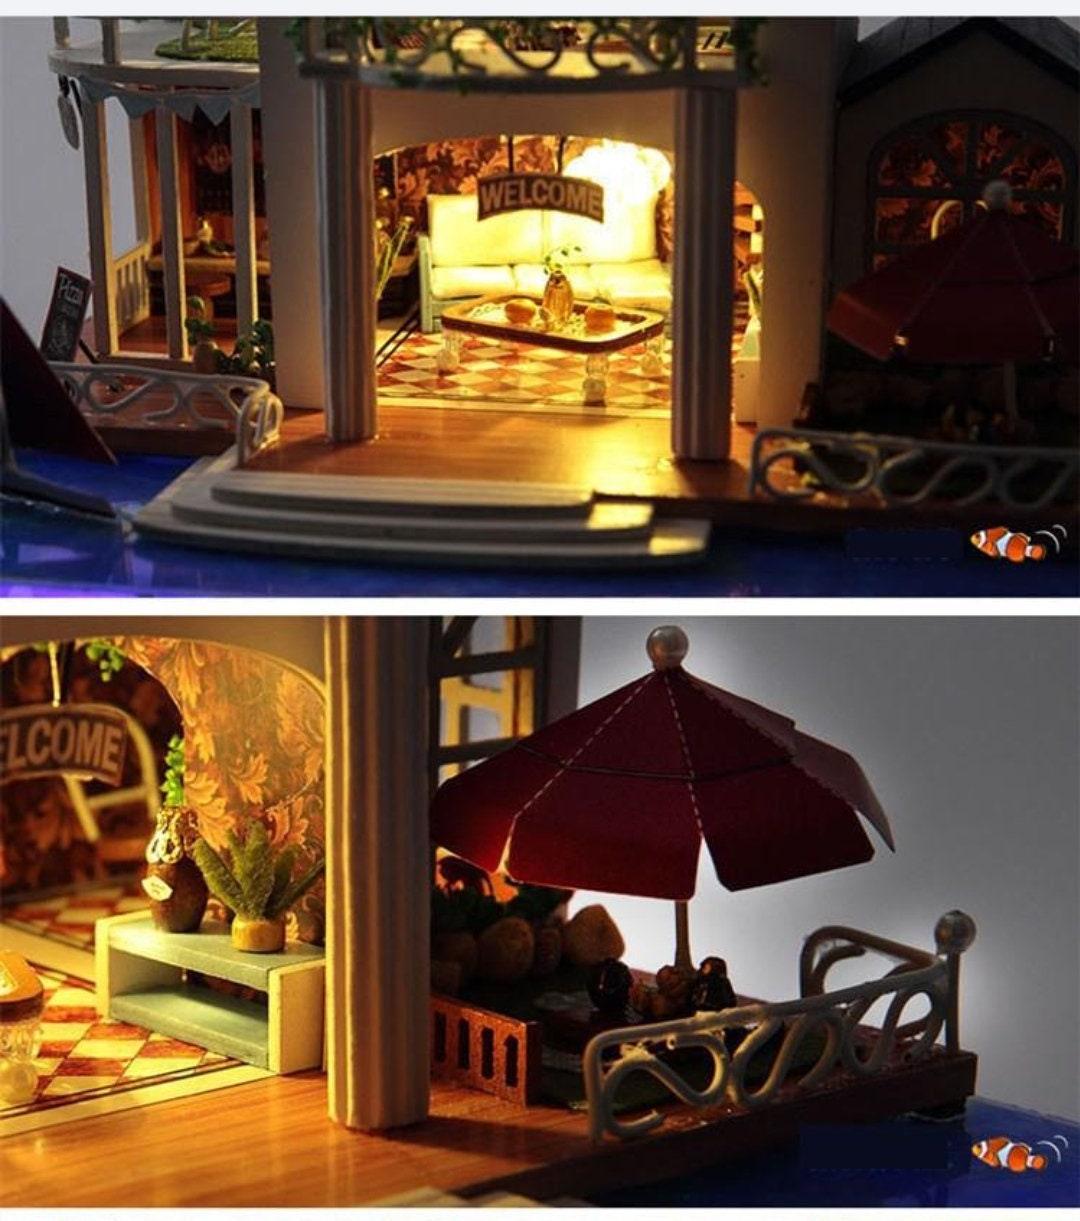 DIY Dollhouse Kit Under Water Life Miniature Dollhouse with Under Water Bedroom, Marine Theme Dollhouse With Free Dust Cover